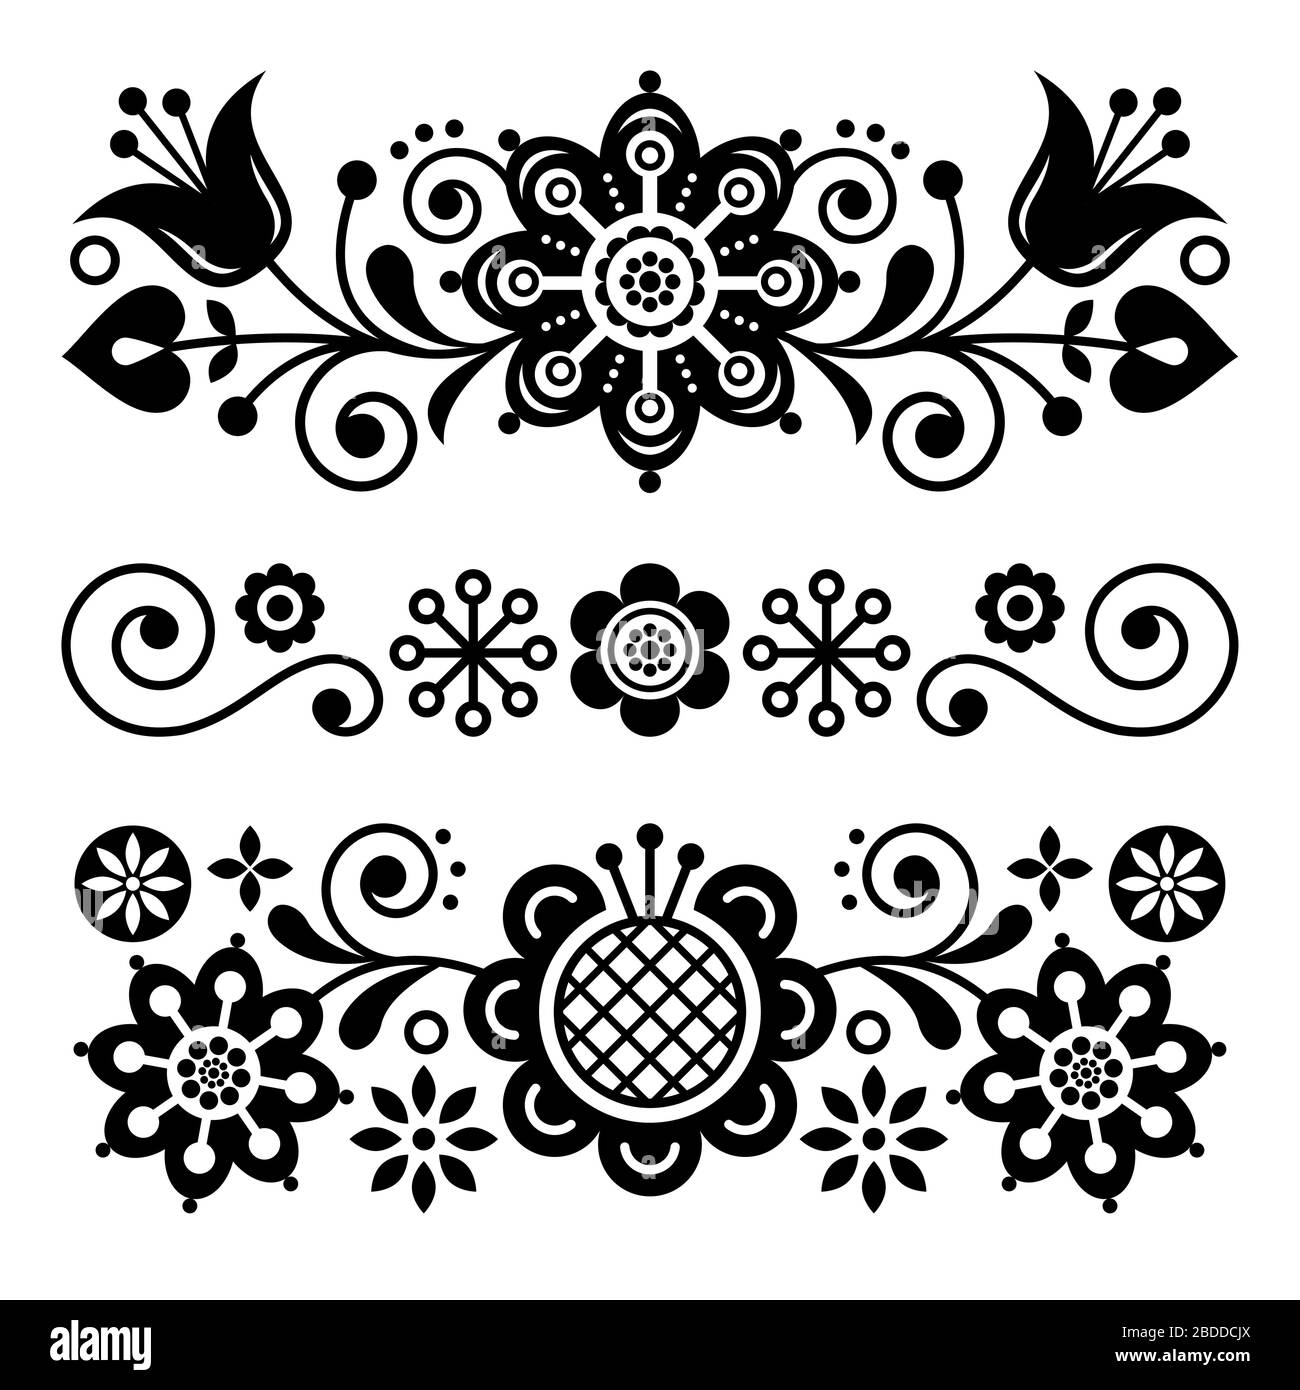 Floral folk art greeting card, design elements, Scandinavian style decor with flowers and leaves, retro black and white floral compositions Stock Vector